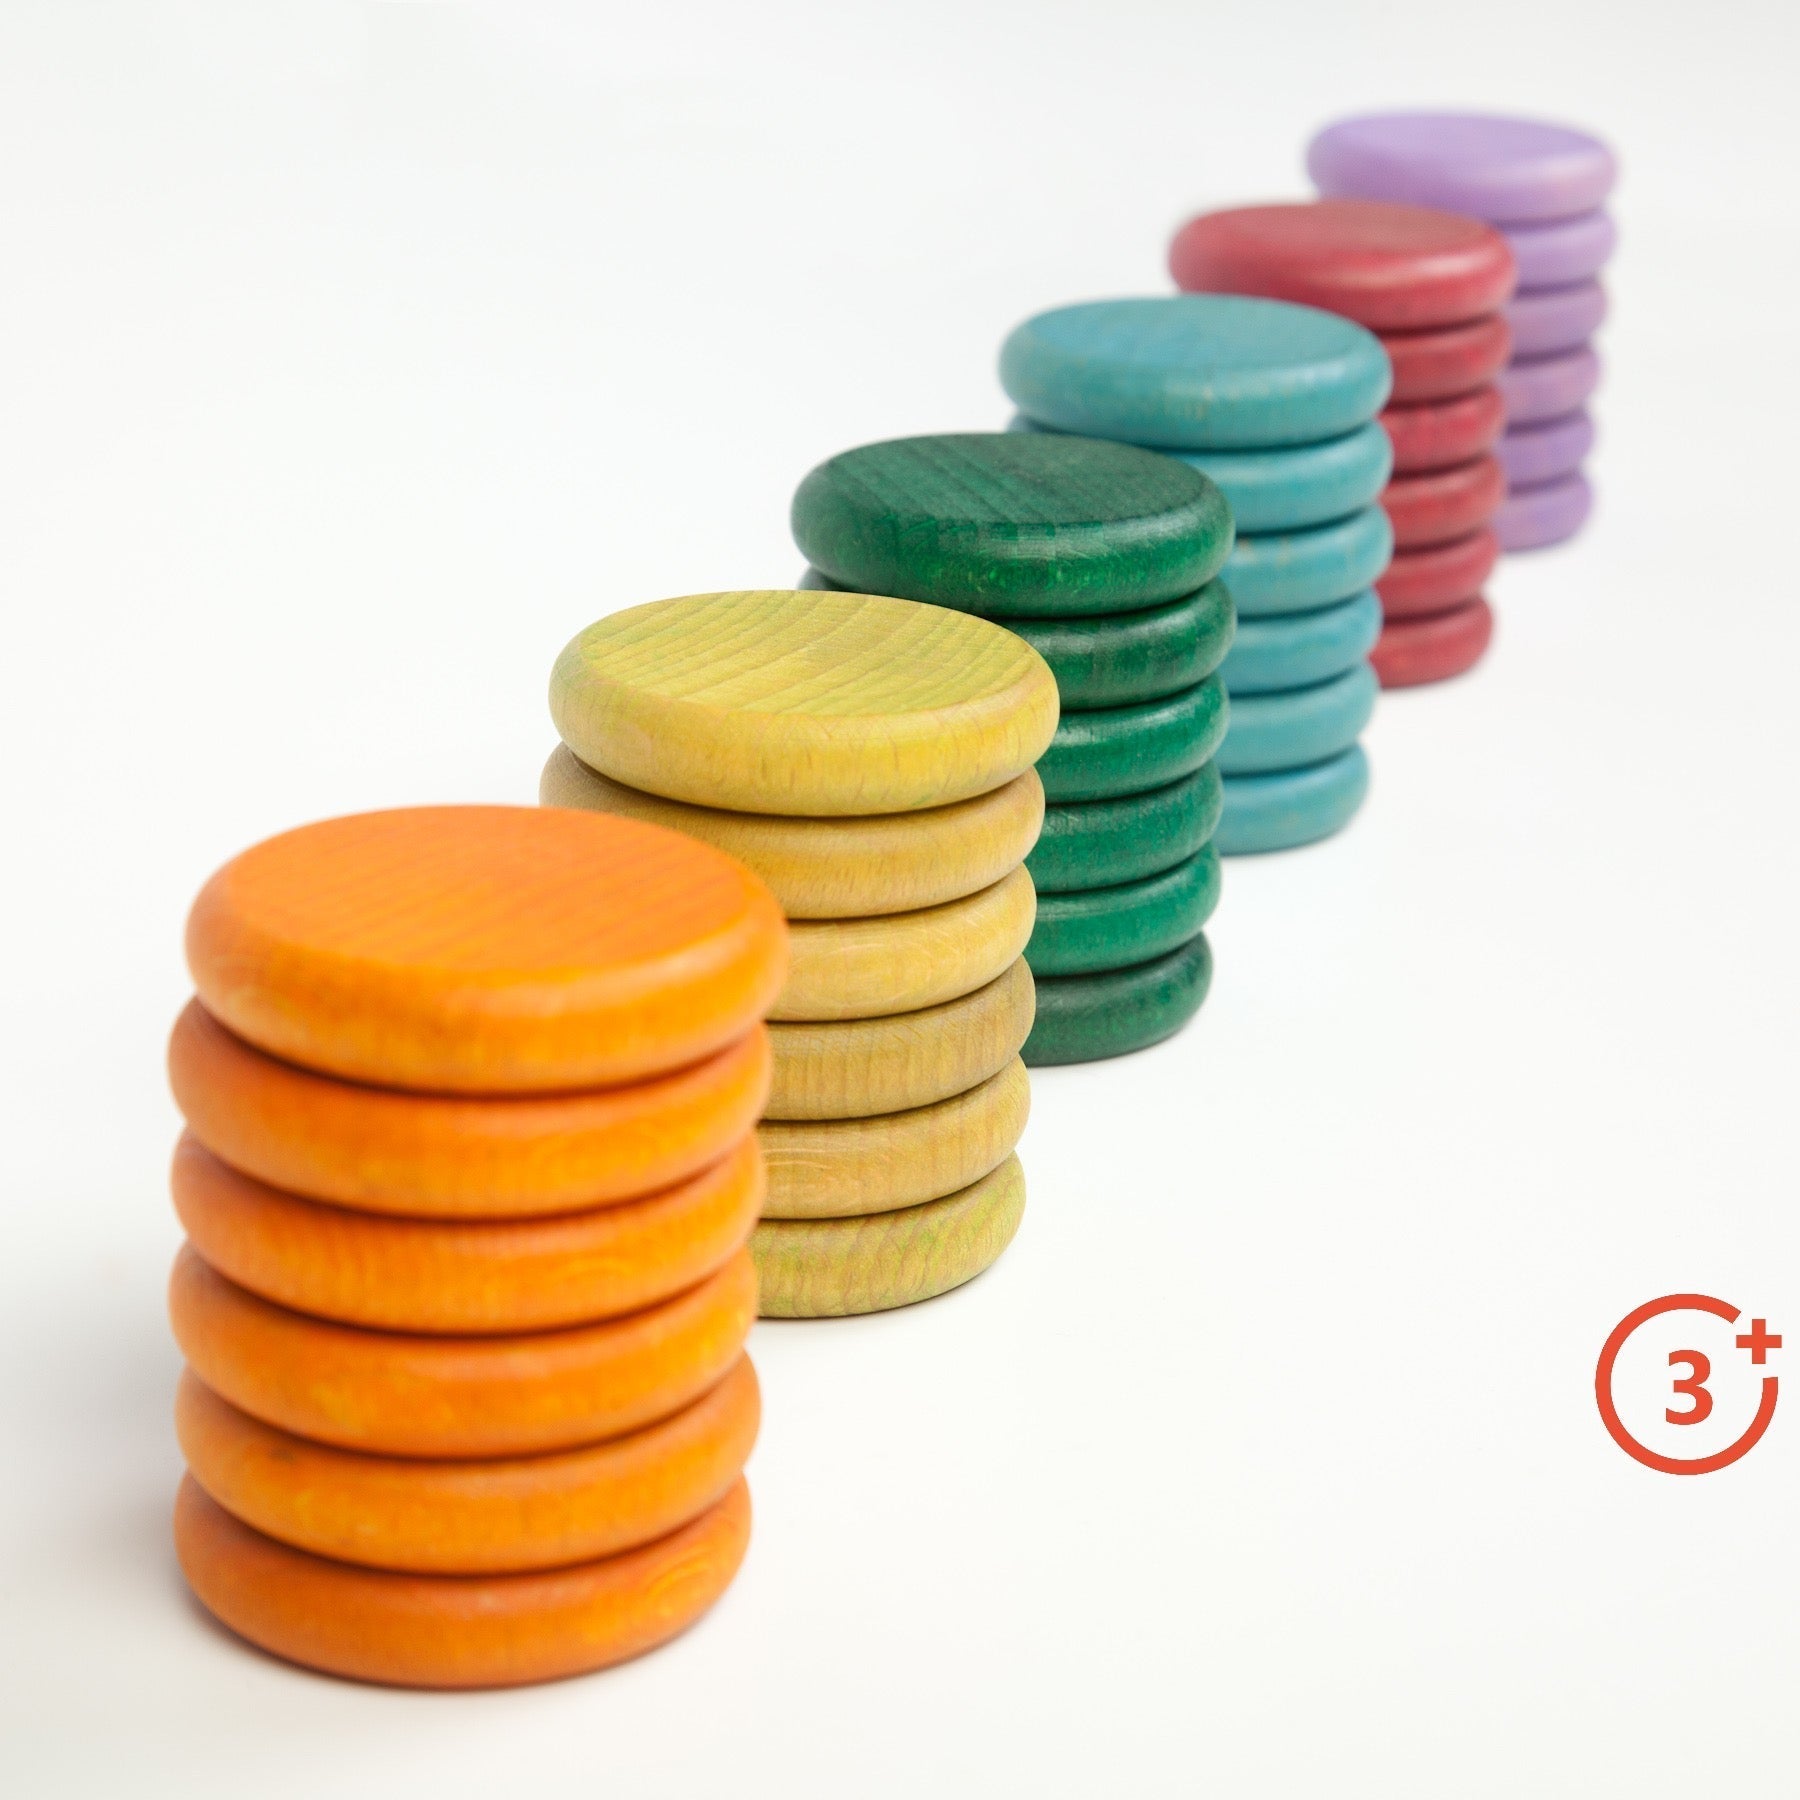 Spare Parts - Grapat Coloured Coins in 6 Non-Basic Colours-Grapat-Modern Rascals